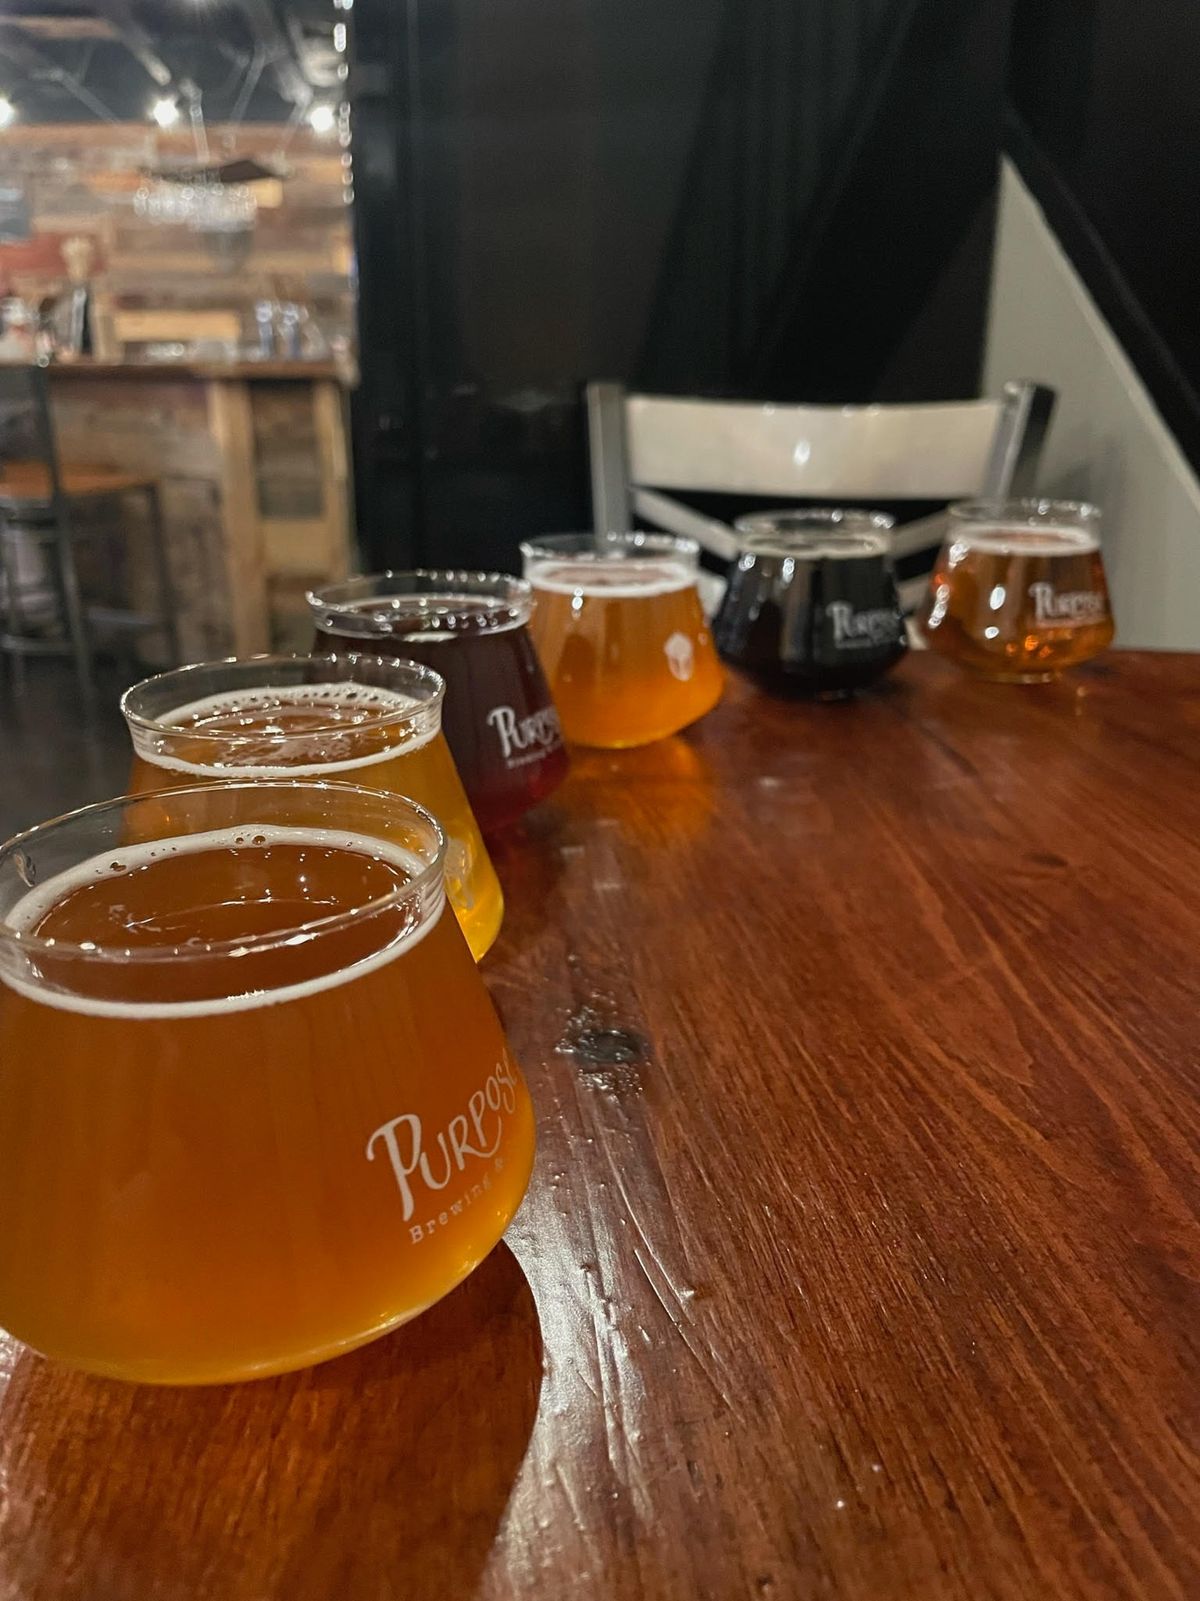 Sour Beer Pre-Party and Tasting - June 21st, Friday, 6pm-10pm @ Purpose Brewing